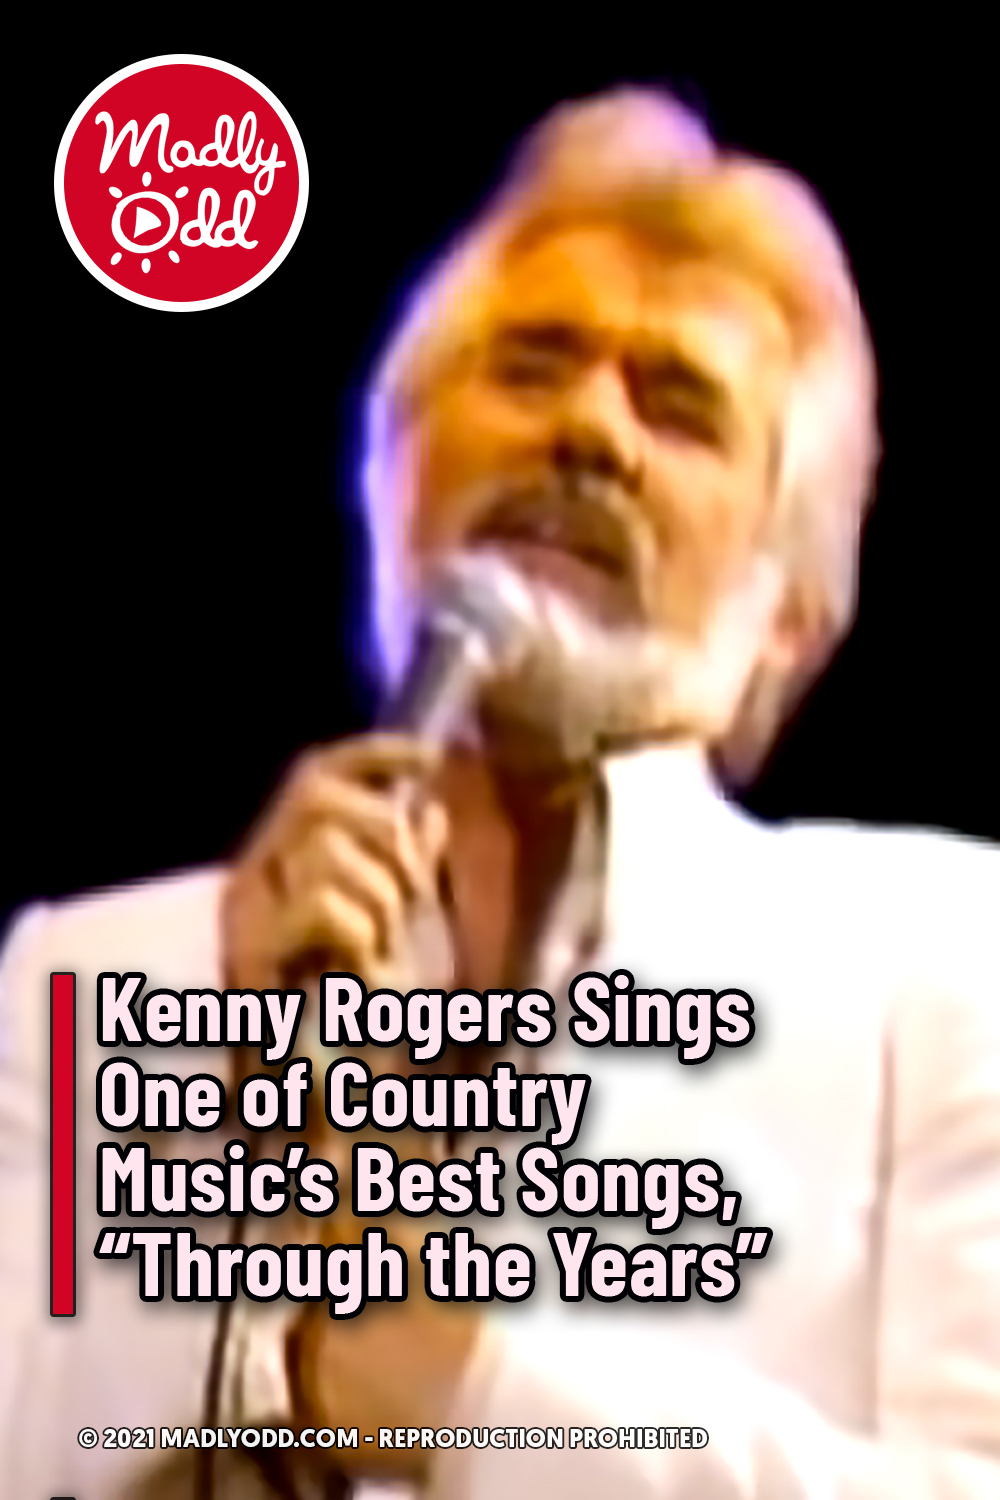 Kenny Rogers Sings One of Country Music\'s Best Songs, “Through the Years”